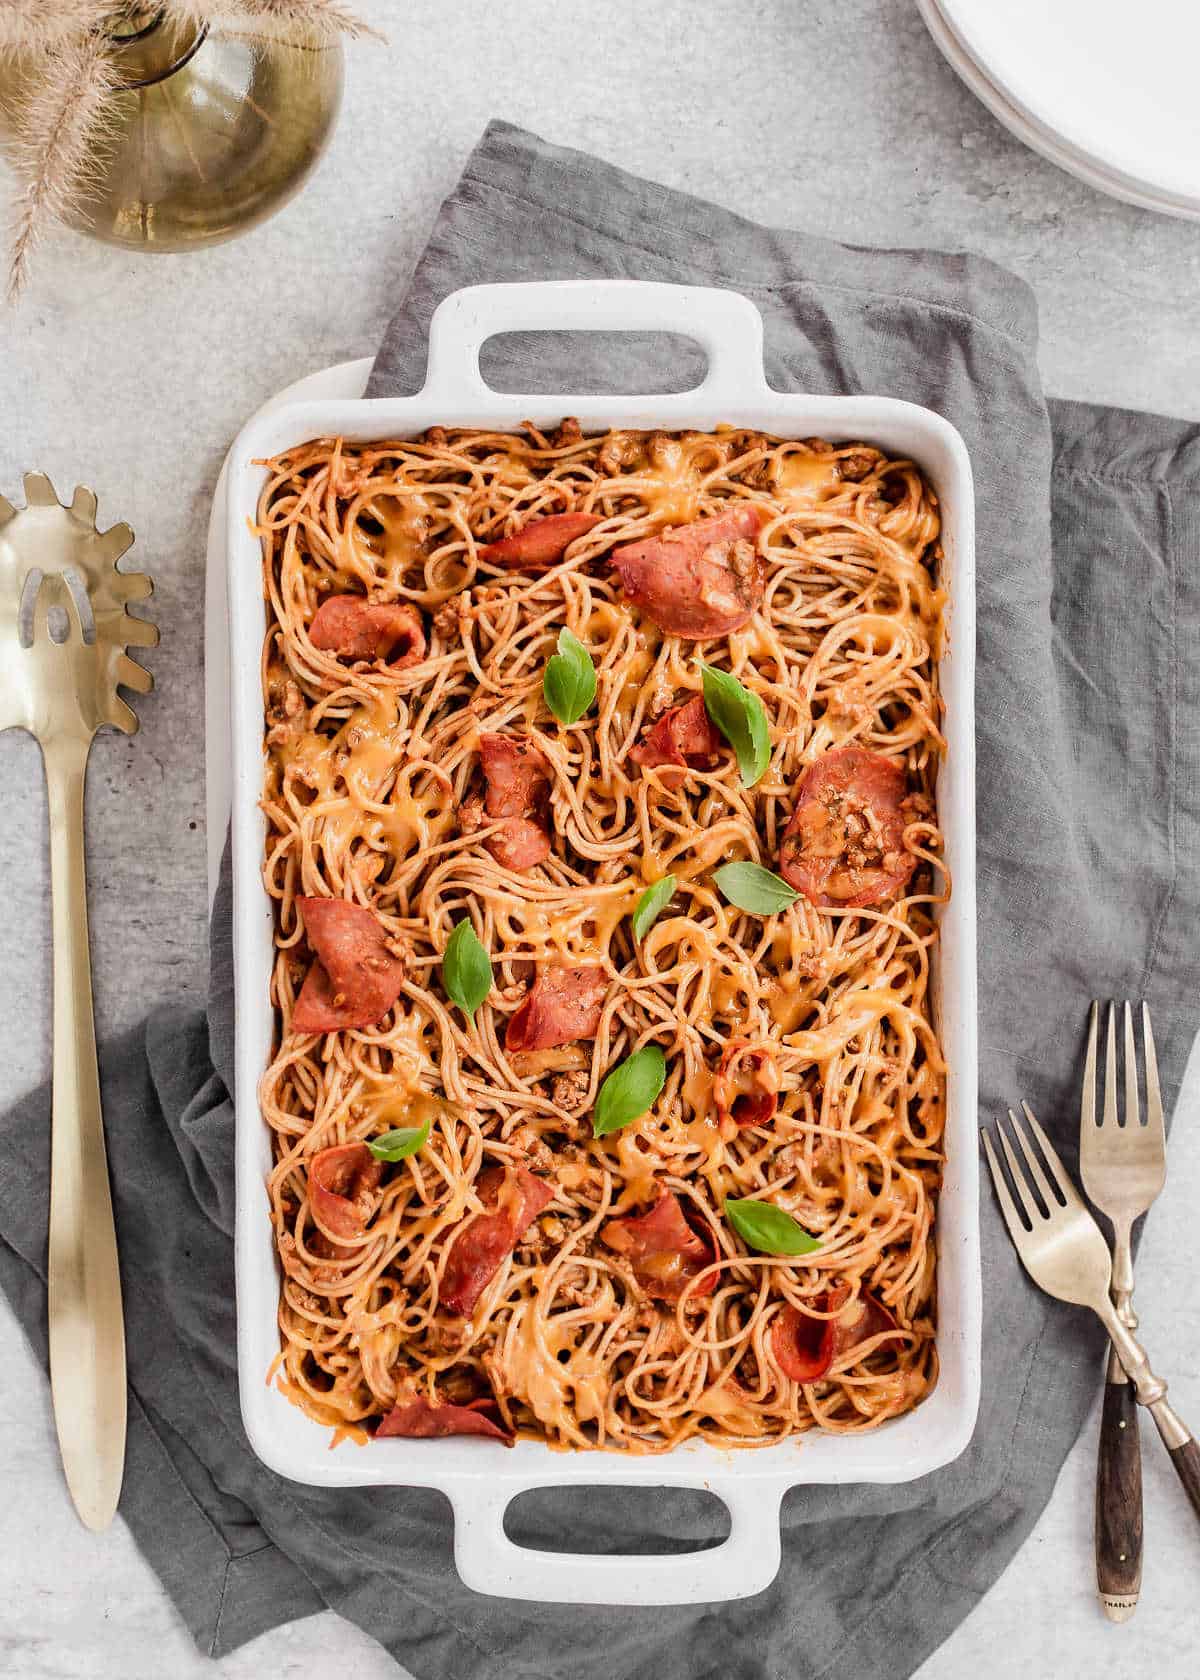 cheesy spaghetti with pepperoni and basil on top, in white casserole dish, overhead view.